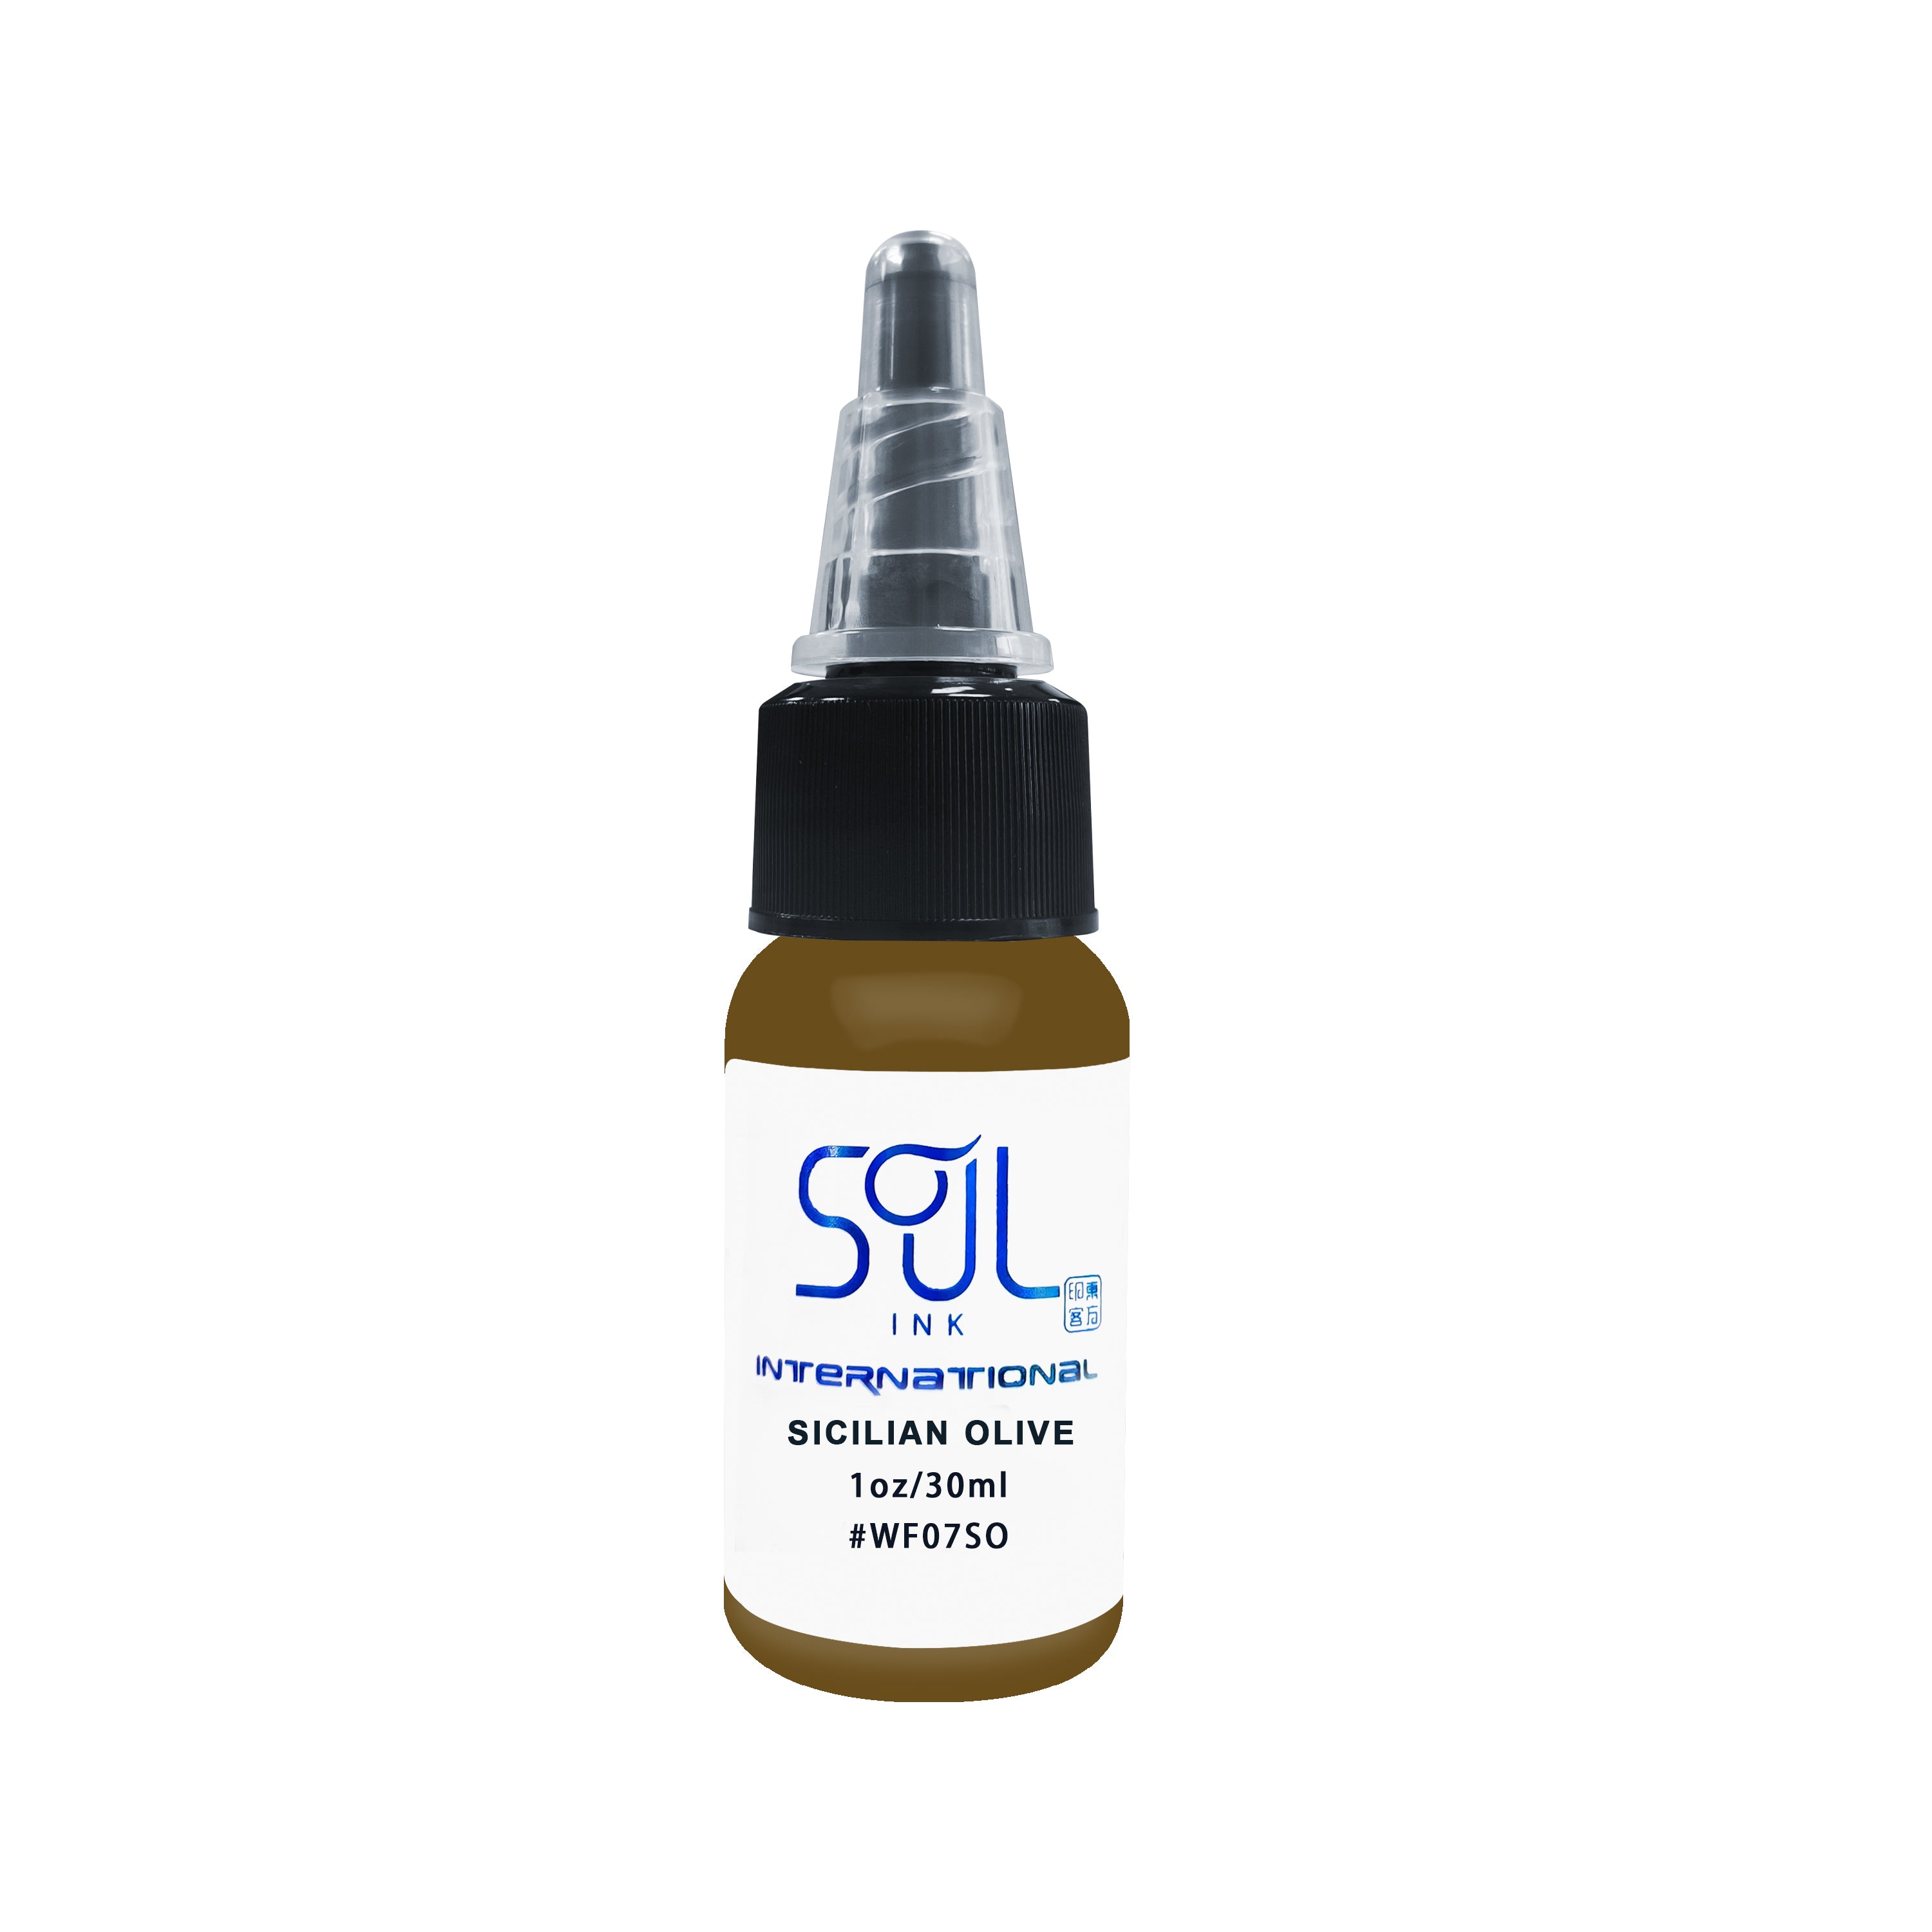 Photograph of a bottle of 'Soul Ink' brand Sicilian olive ink. The label prominently displays the brand name 'Soul Ink' in stylish blue typography against a white background. The Sicilian olive 30 ml bottle with a white label featuring the brands name 'Soul Ink'.